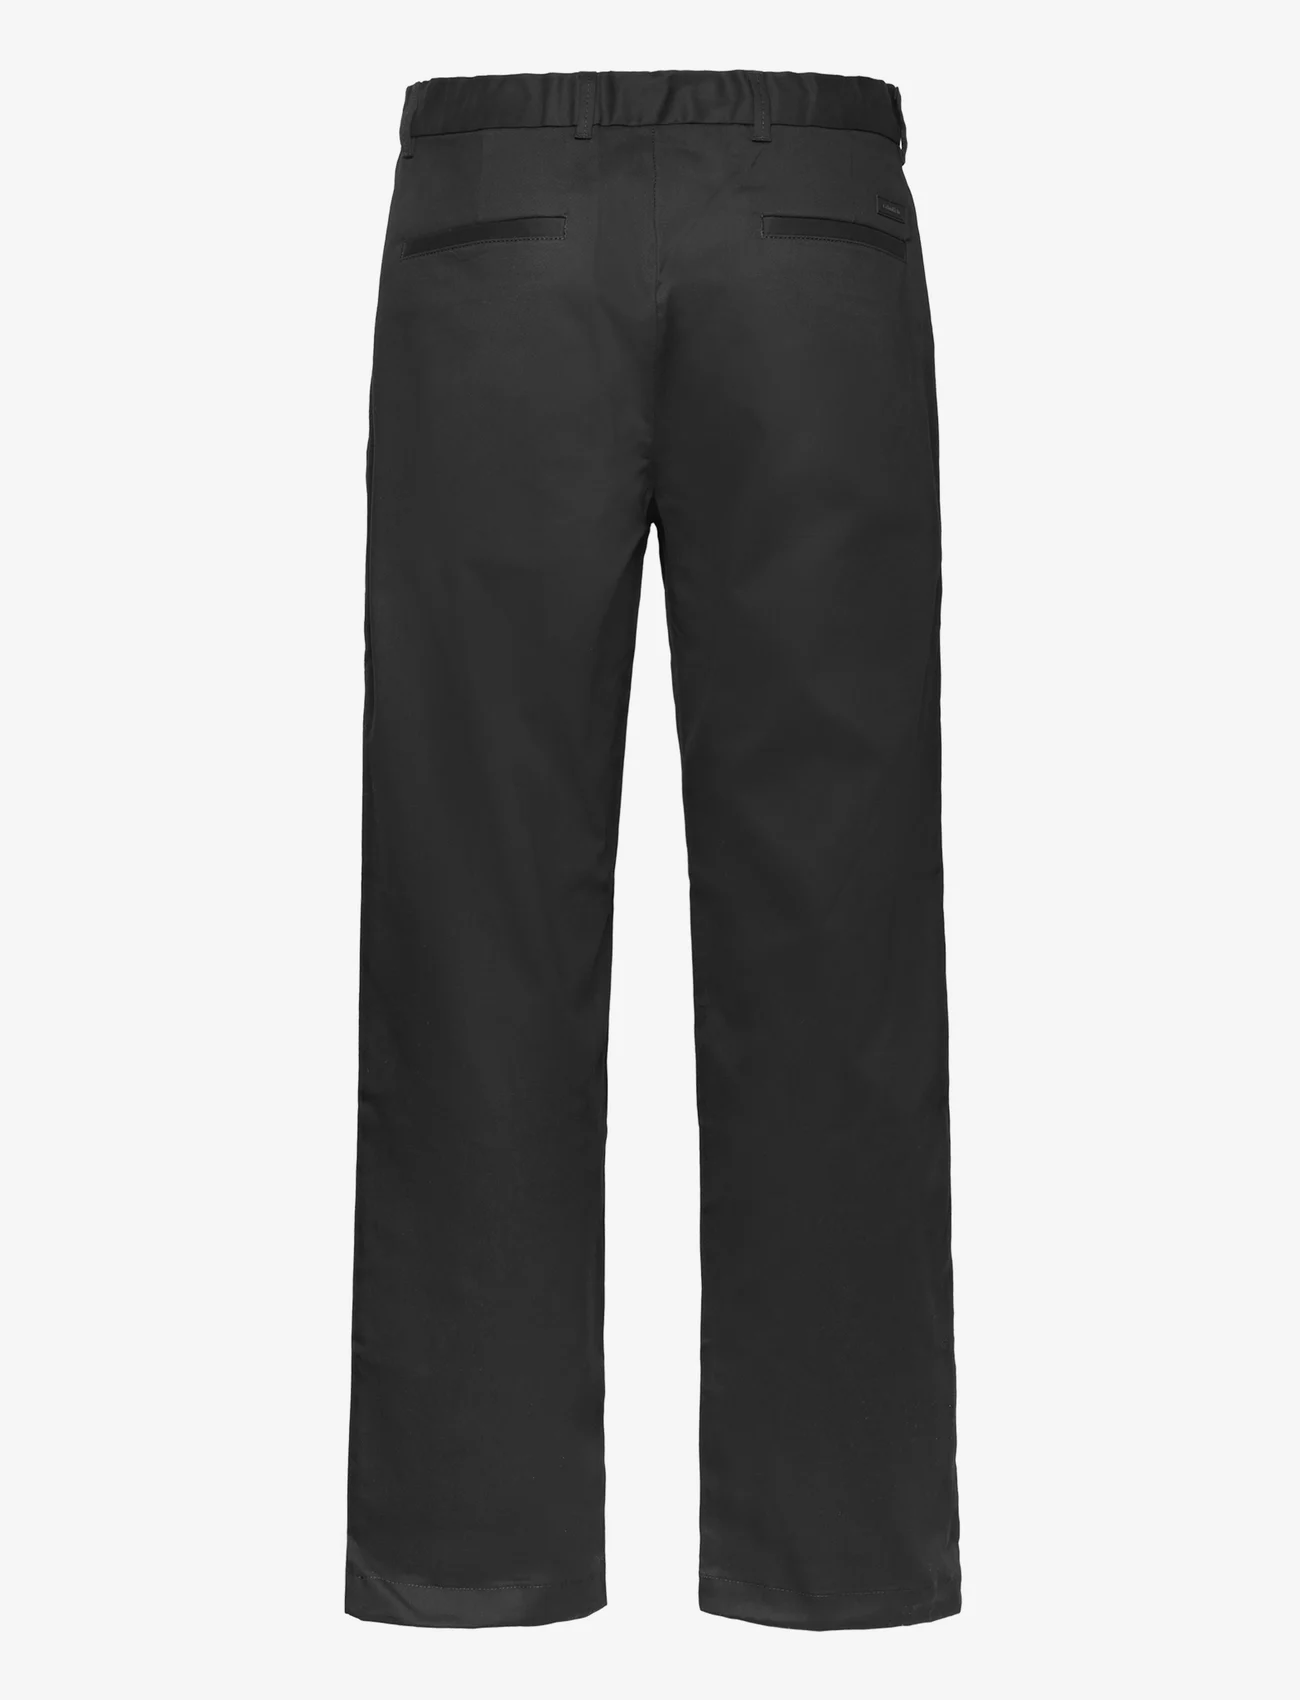 Calvin Klein - MODERN TWILL RELAXED PANTS - chinosy - ck black - 1